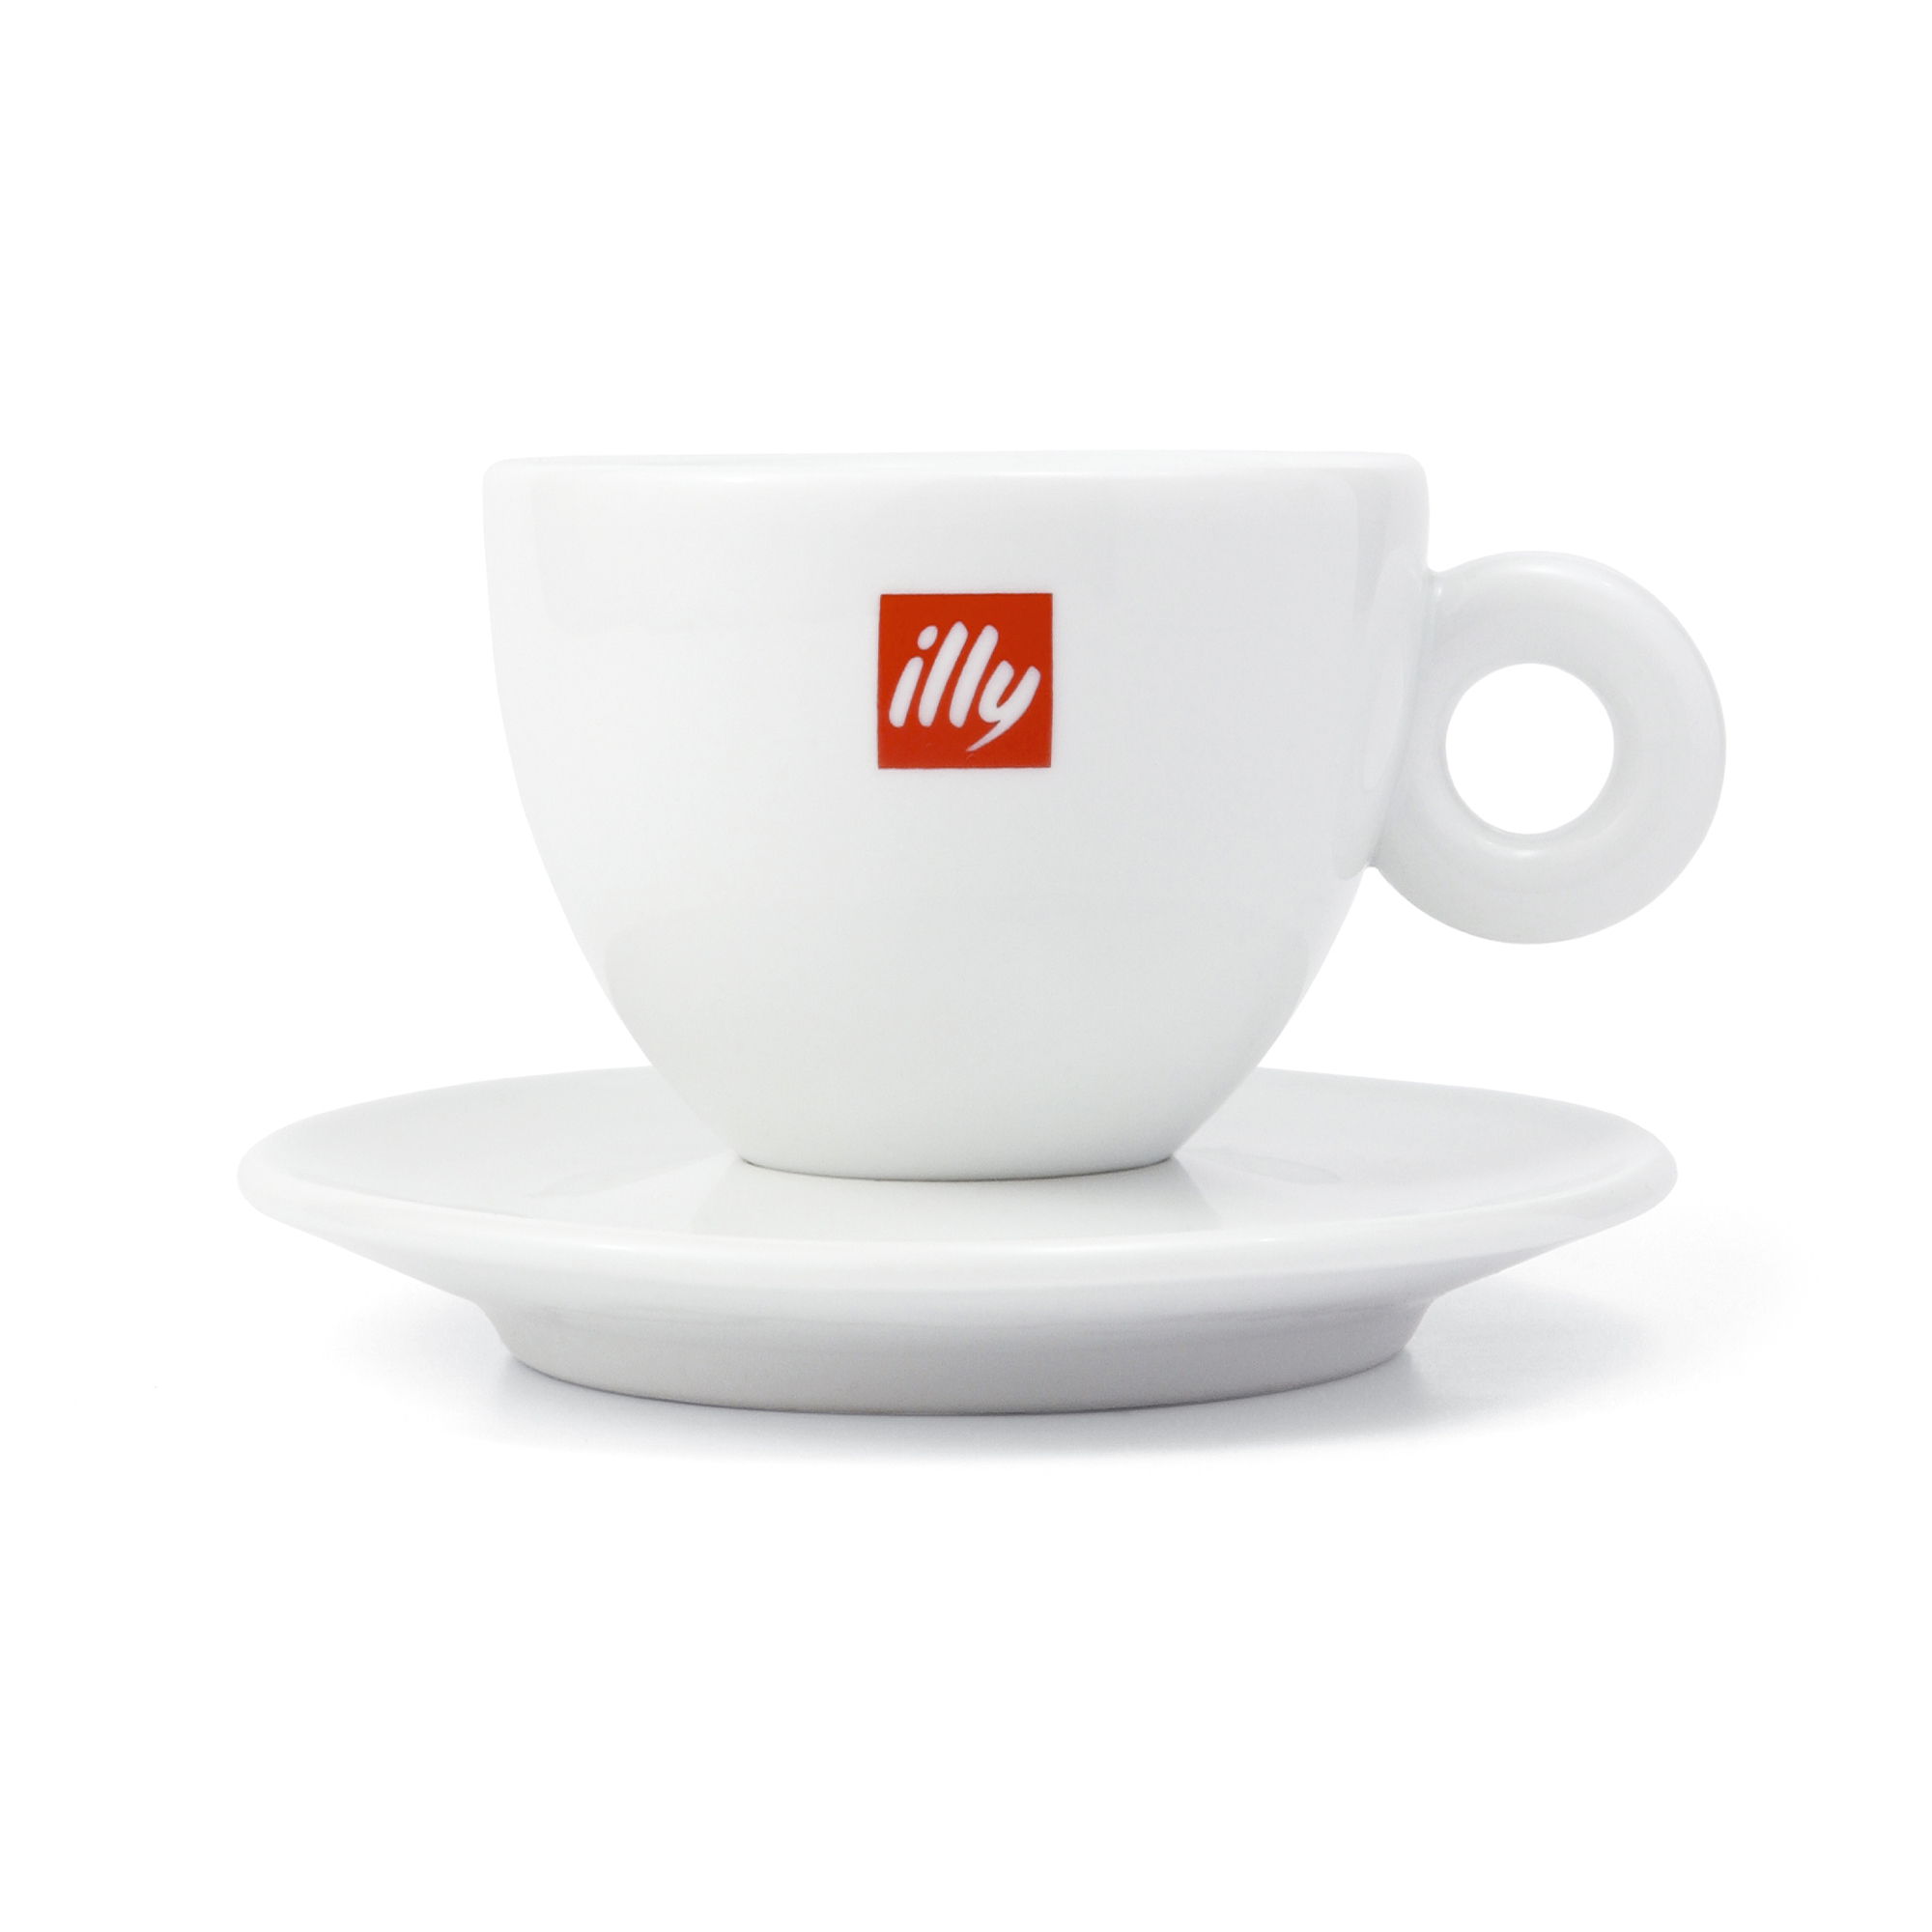 https://www.illy.com/on/demandware.static/-/Sites-masterCatalog_illycaffe/default/dw9b1edfdf/products/Cups/Essential/A008_accessories_cups_illy-logo-capp-cups_illy-shop/A008_accessories_cups_illy-logo-capp-cups_illy-shop_2000x2000.JPG